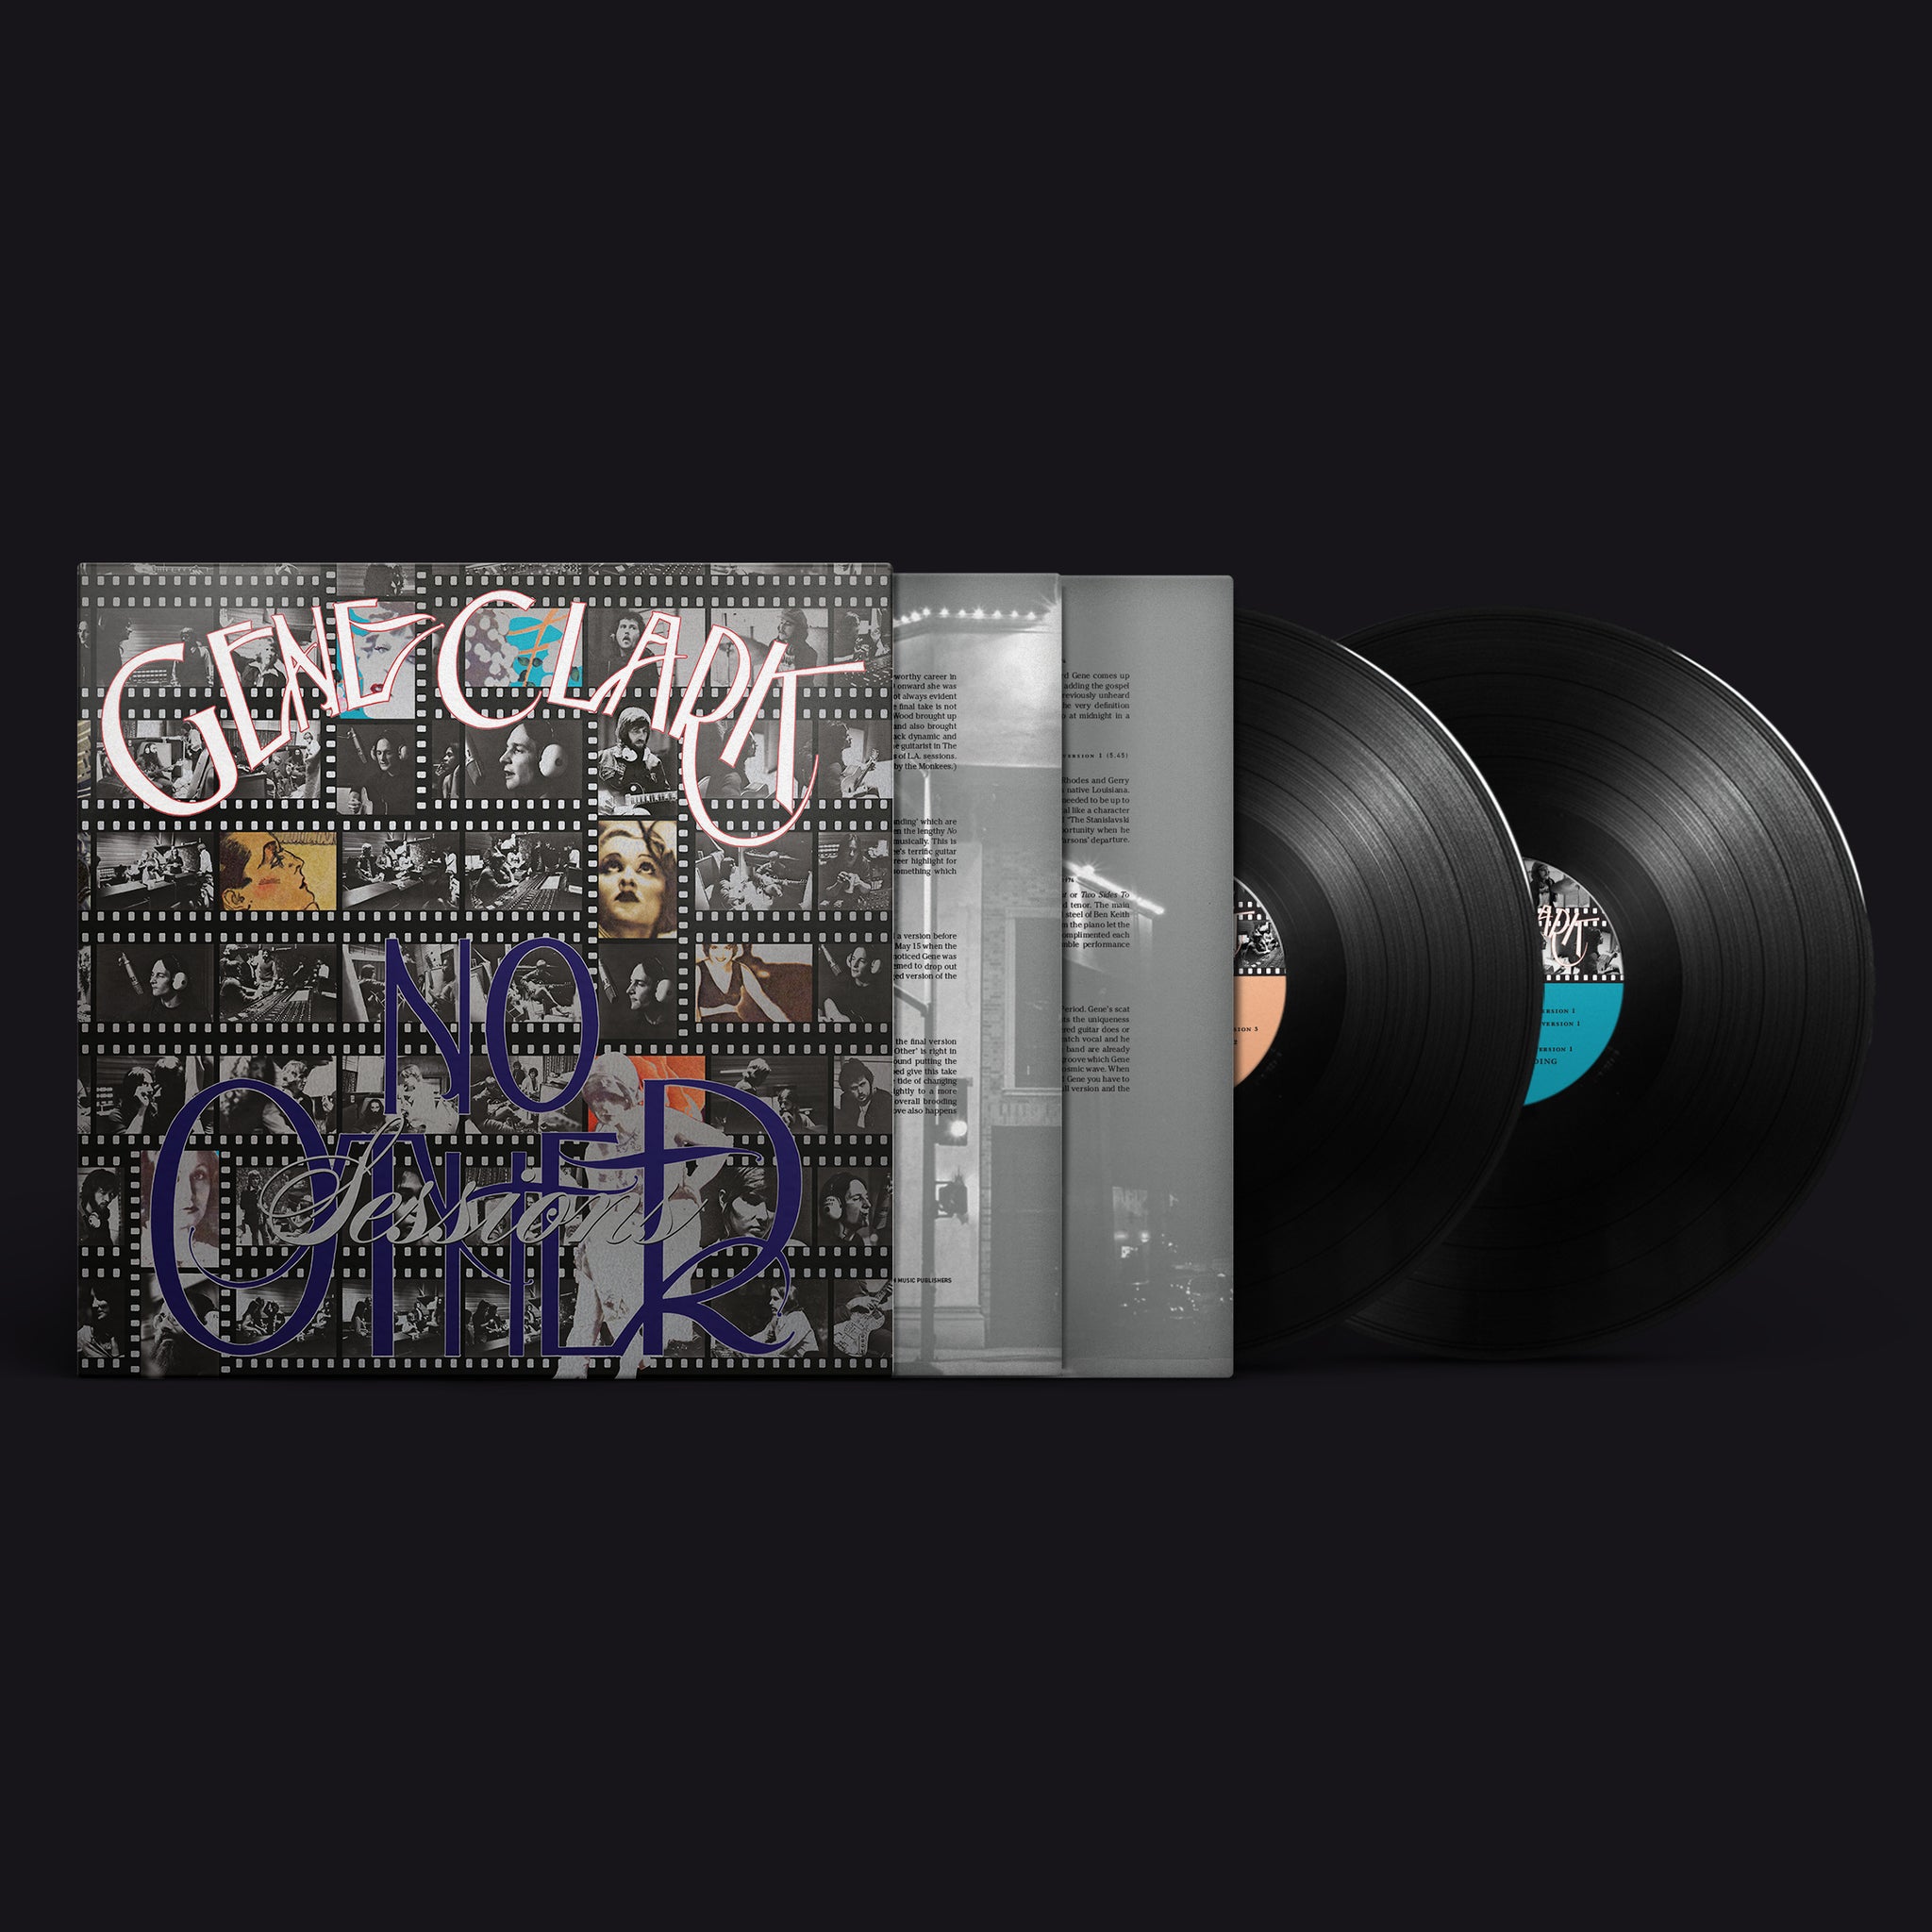 GENE CLARK - No Other Sessions (50th Anniversary of No Other) - 2 LP - Black Vinyl  [RSD 2024]